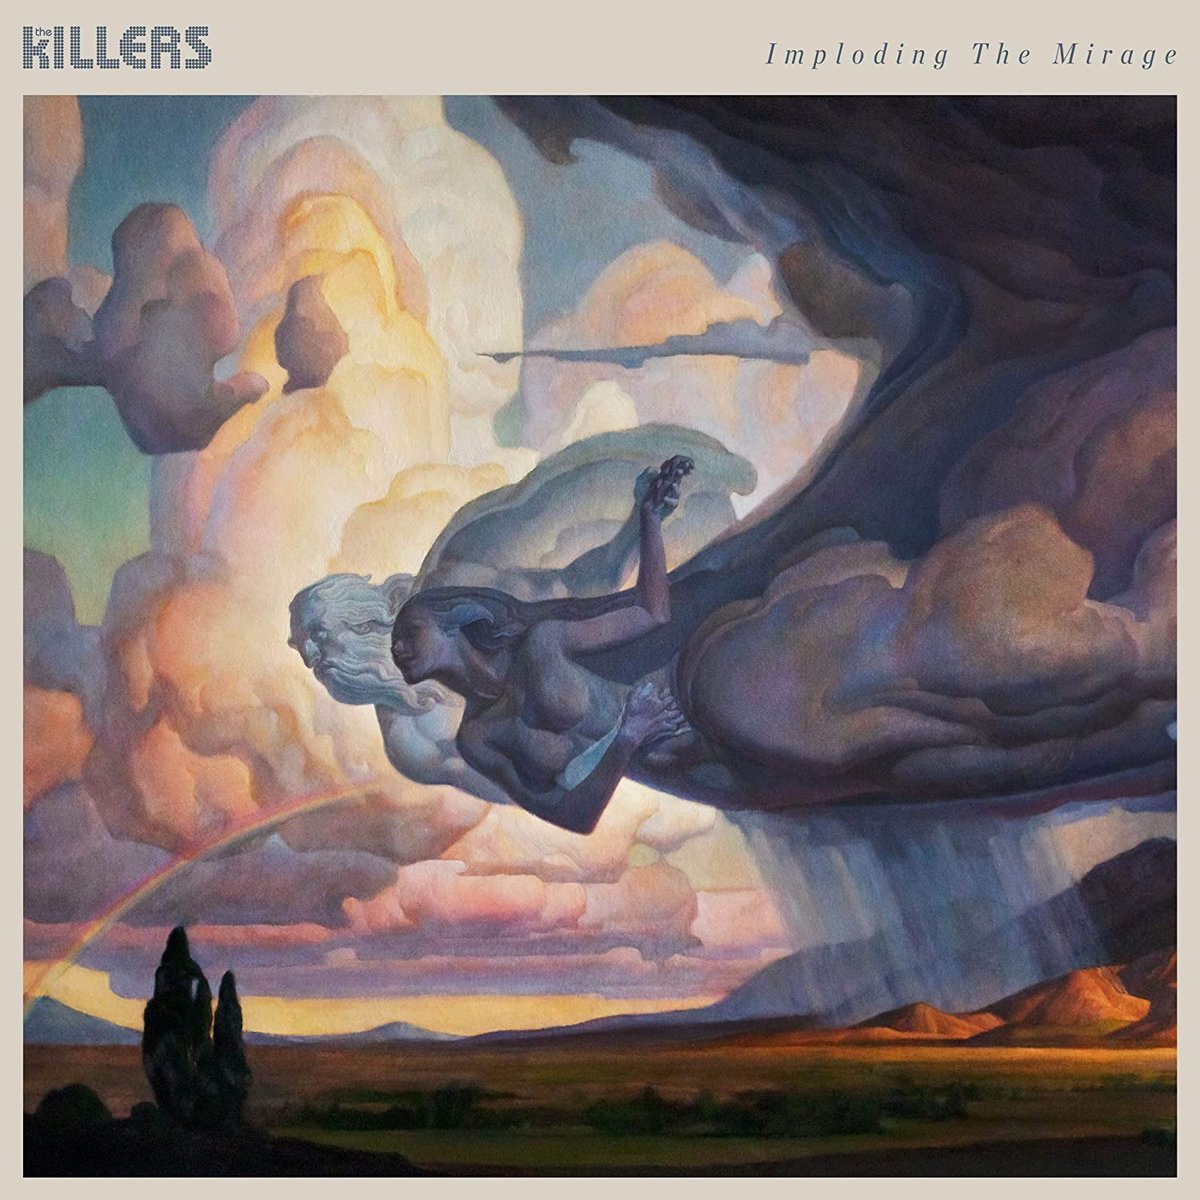 24. Imploding The Mirage - The Killers.We were waiting what felt like a eternity for a new Killers album, but I'm delighted to say that the wait was worth it. I hope one day I'll get to see them live. Best tracks:My Own Soul's WarningCautionFire In BoneLighting Fields